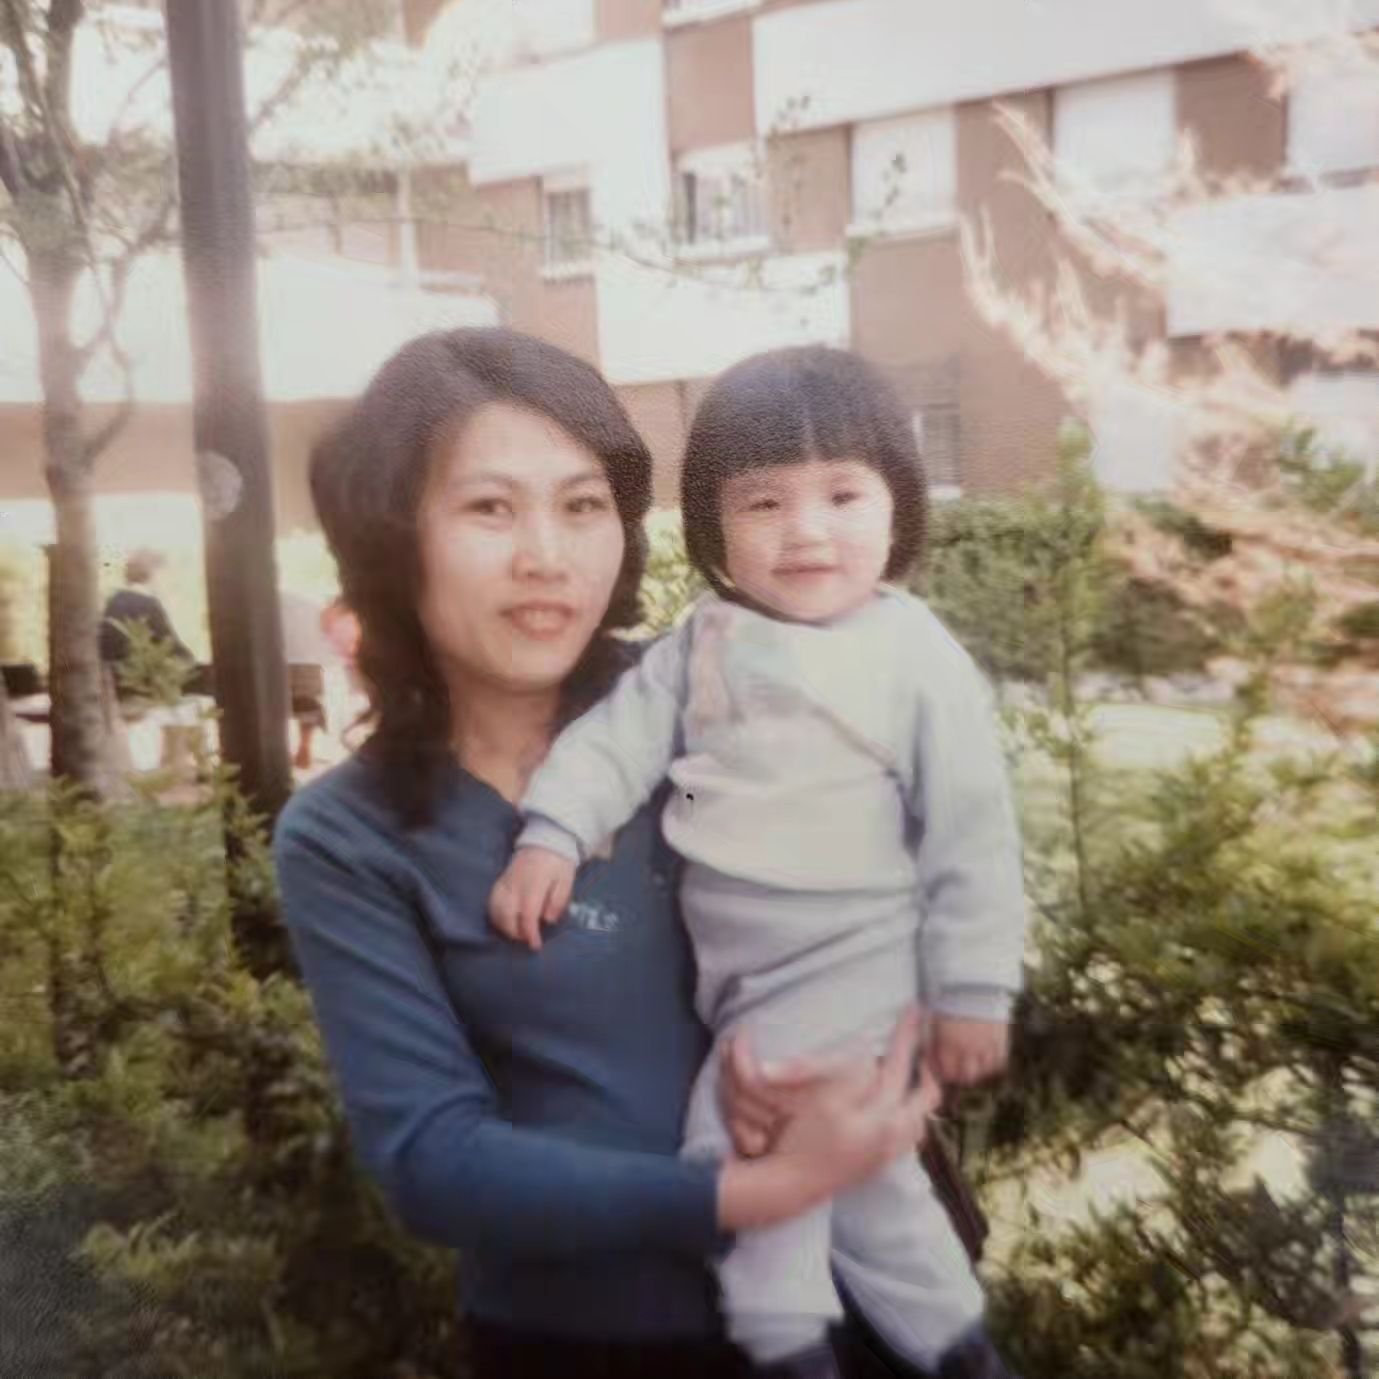 Happy mother's day to all the incredible moms out there &hearts;️🌹🌸 
A little shoutout to my mom, an asian immigrant and Cambodian Genocide survivor who came here with nothing in her pockets but gave everything for us to have the best life we could